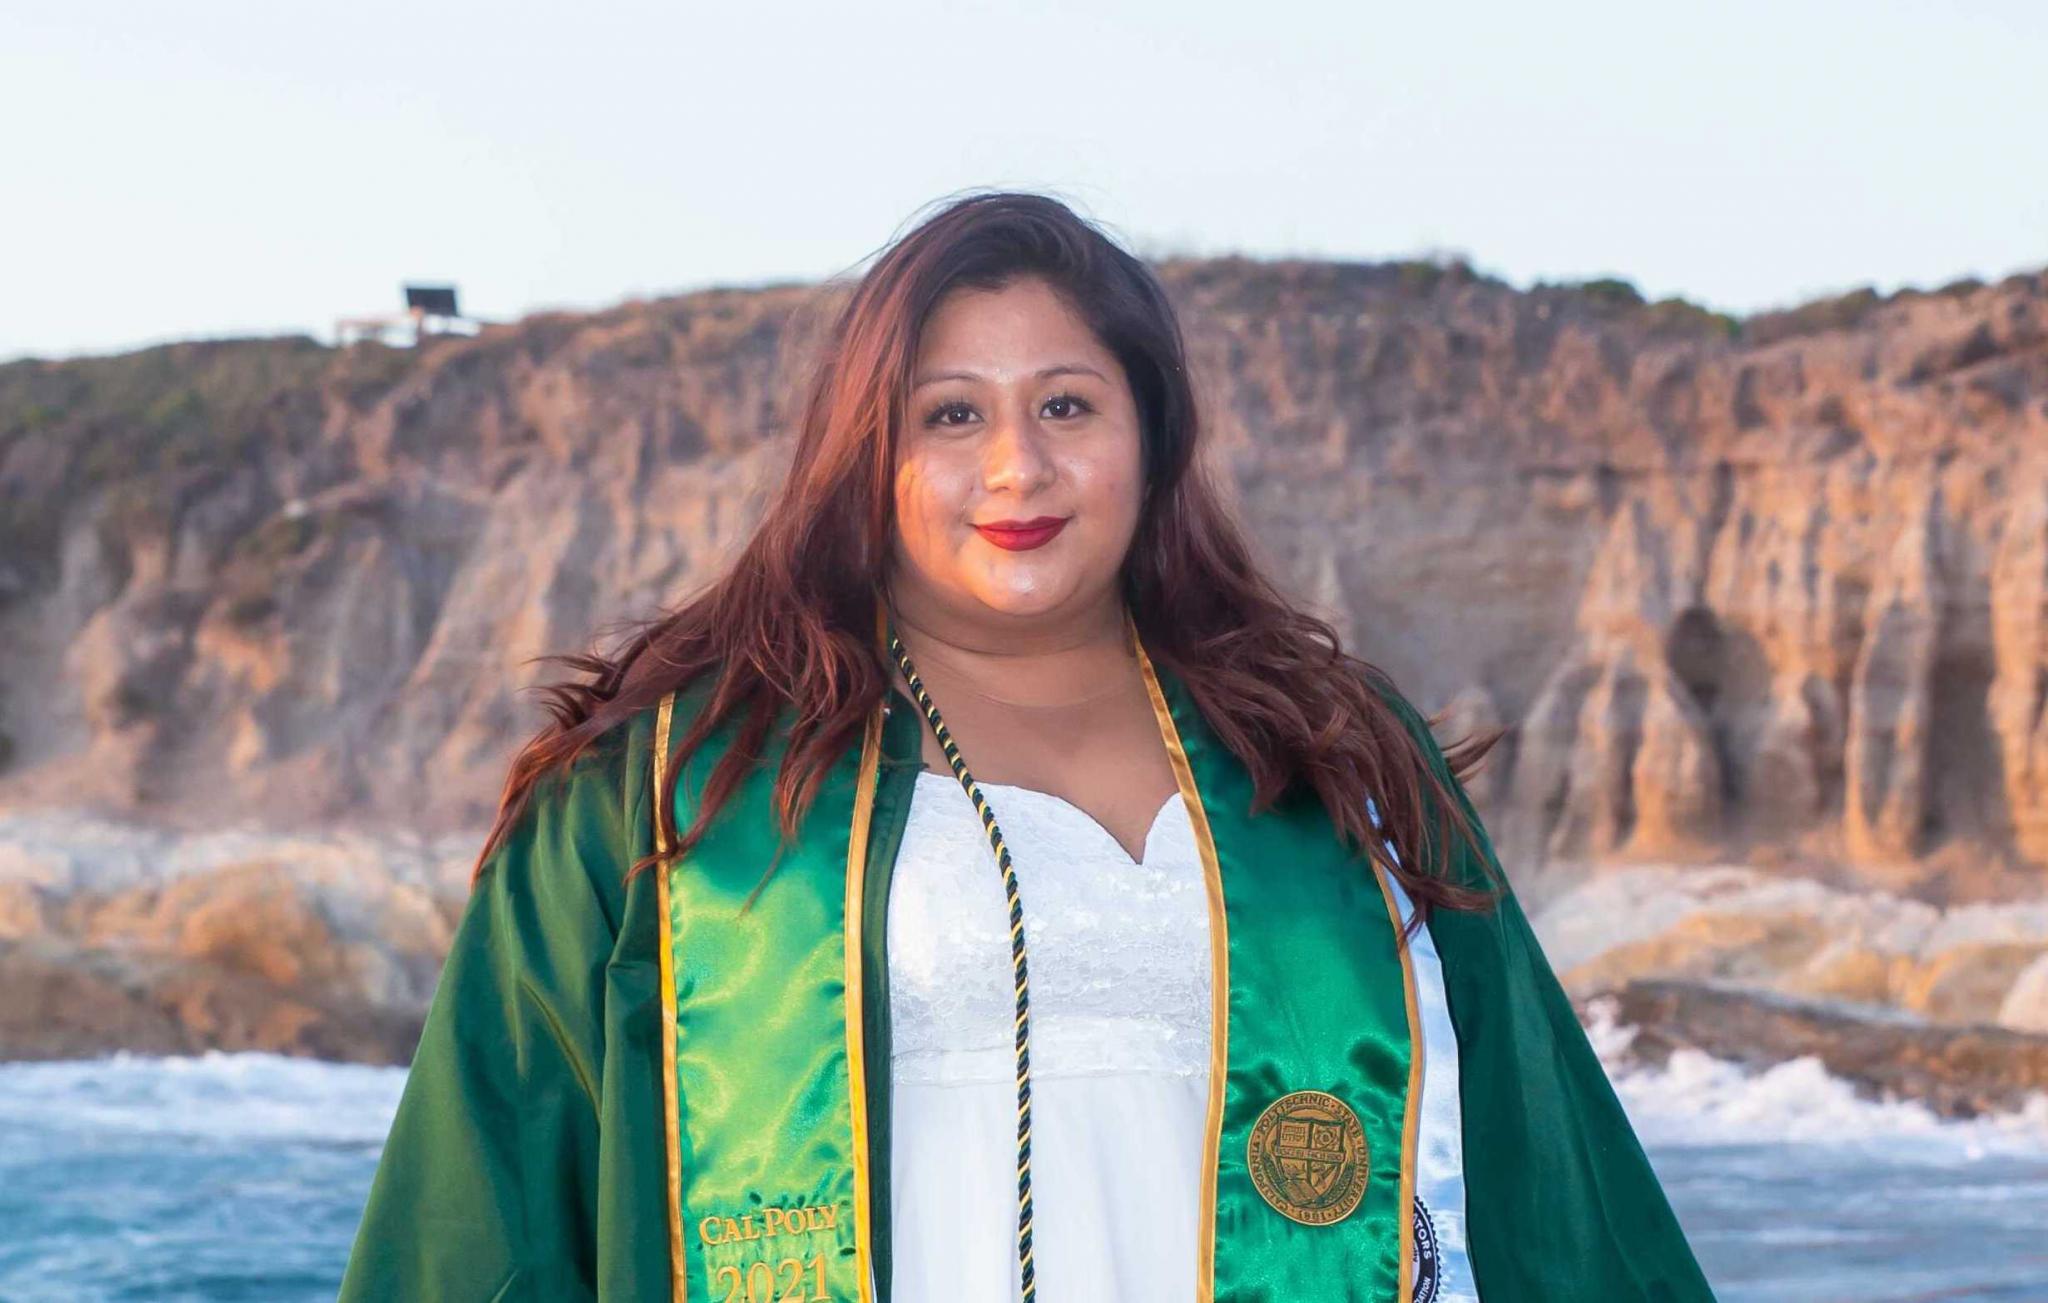 New graduate Francisca Camarillo stands in her green graduation robes in front of a beach with cliffs in the background.